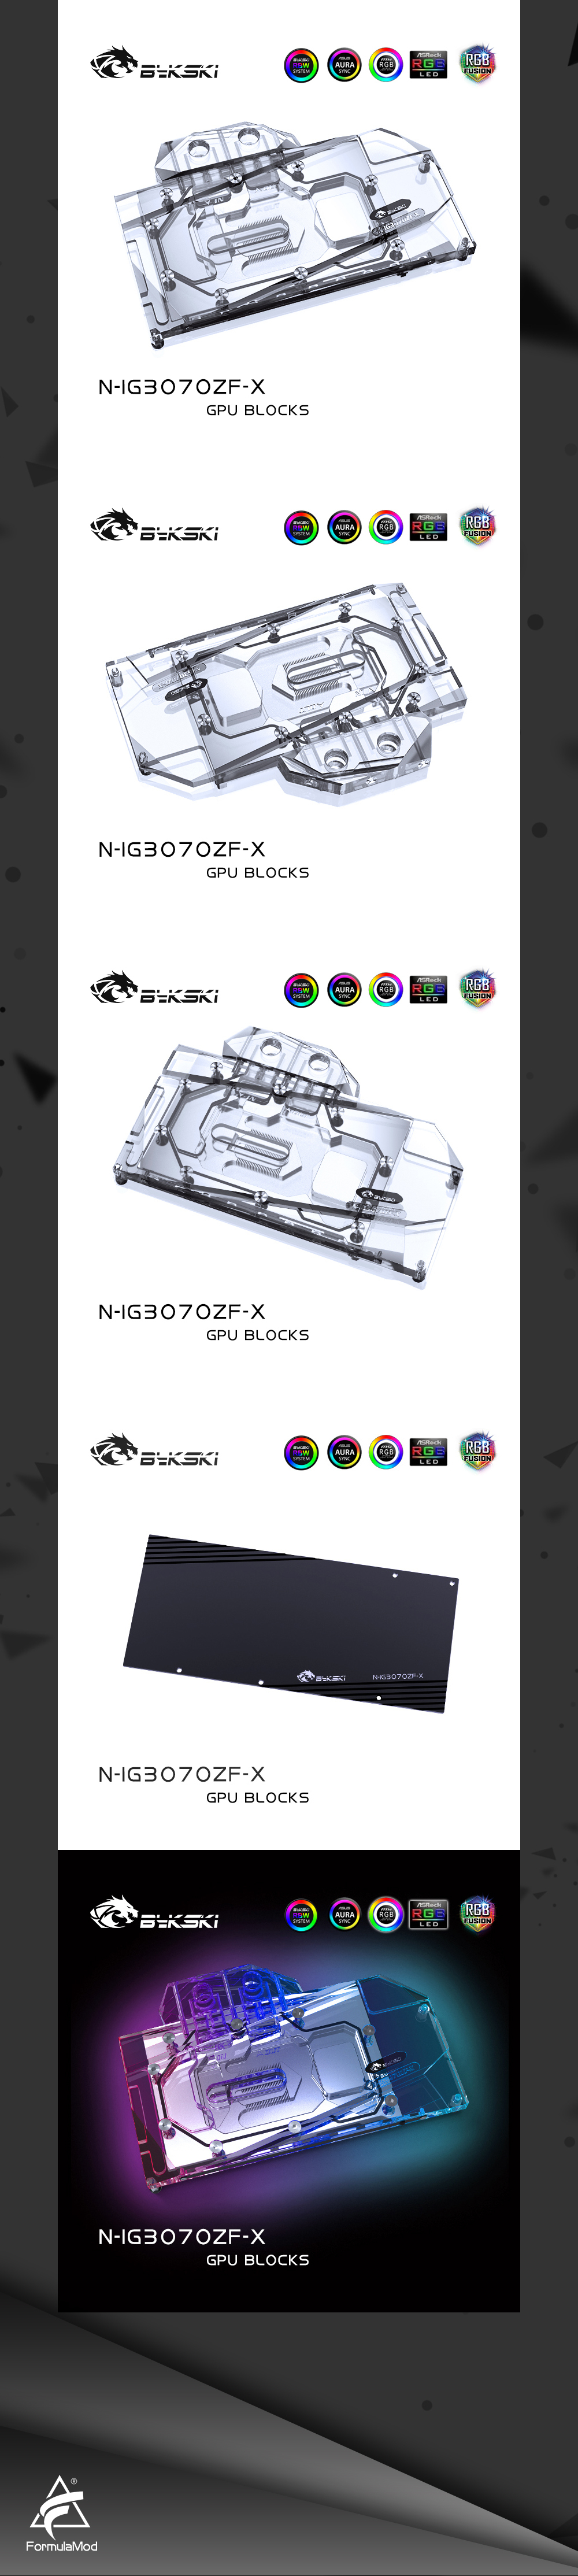 Bykski GPU Water Cooling Block For Colorful RTX 3070 Battle-AX 8G, Graphics Card Liquid Cooler System, N-IG3070ZF-X  